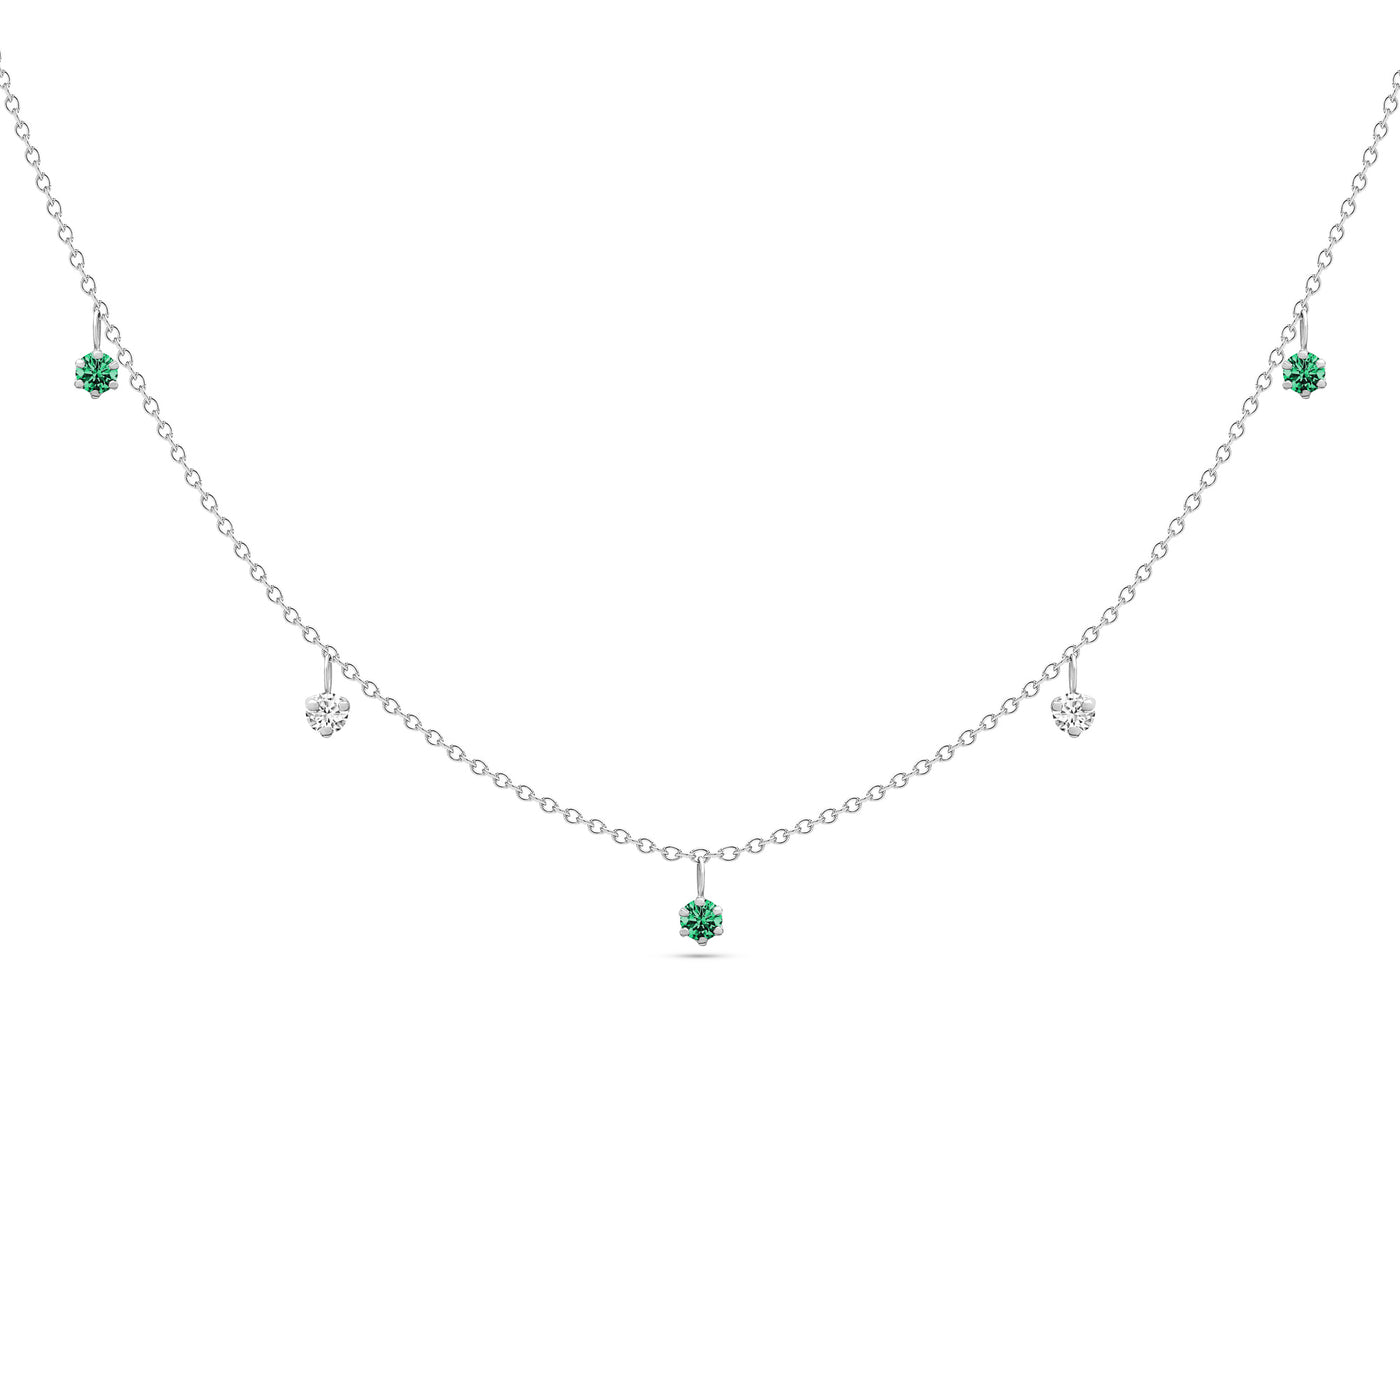 14K Solid Gold Dangling Emerald and Diamond Necklace